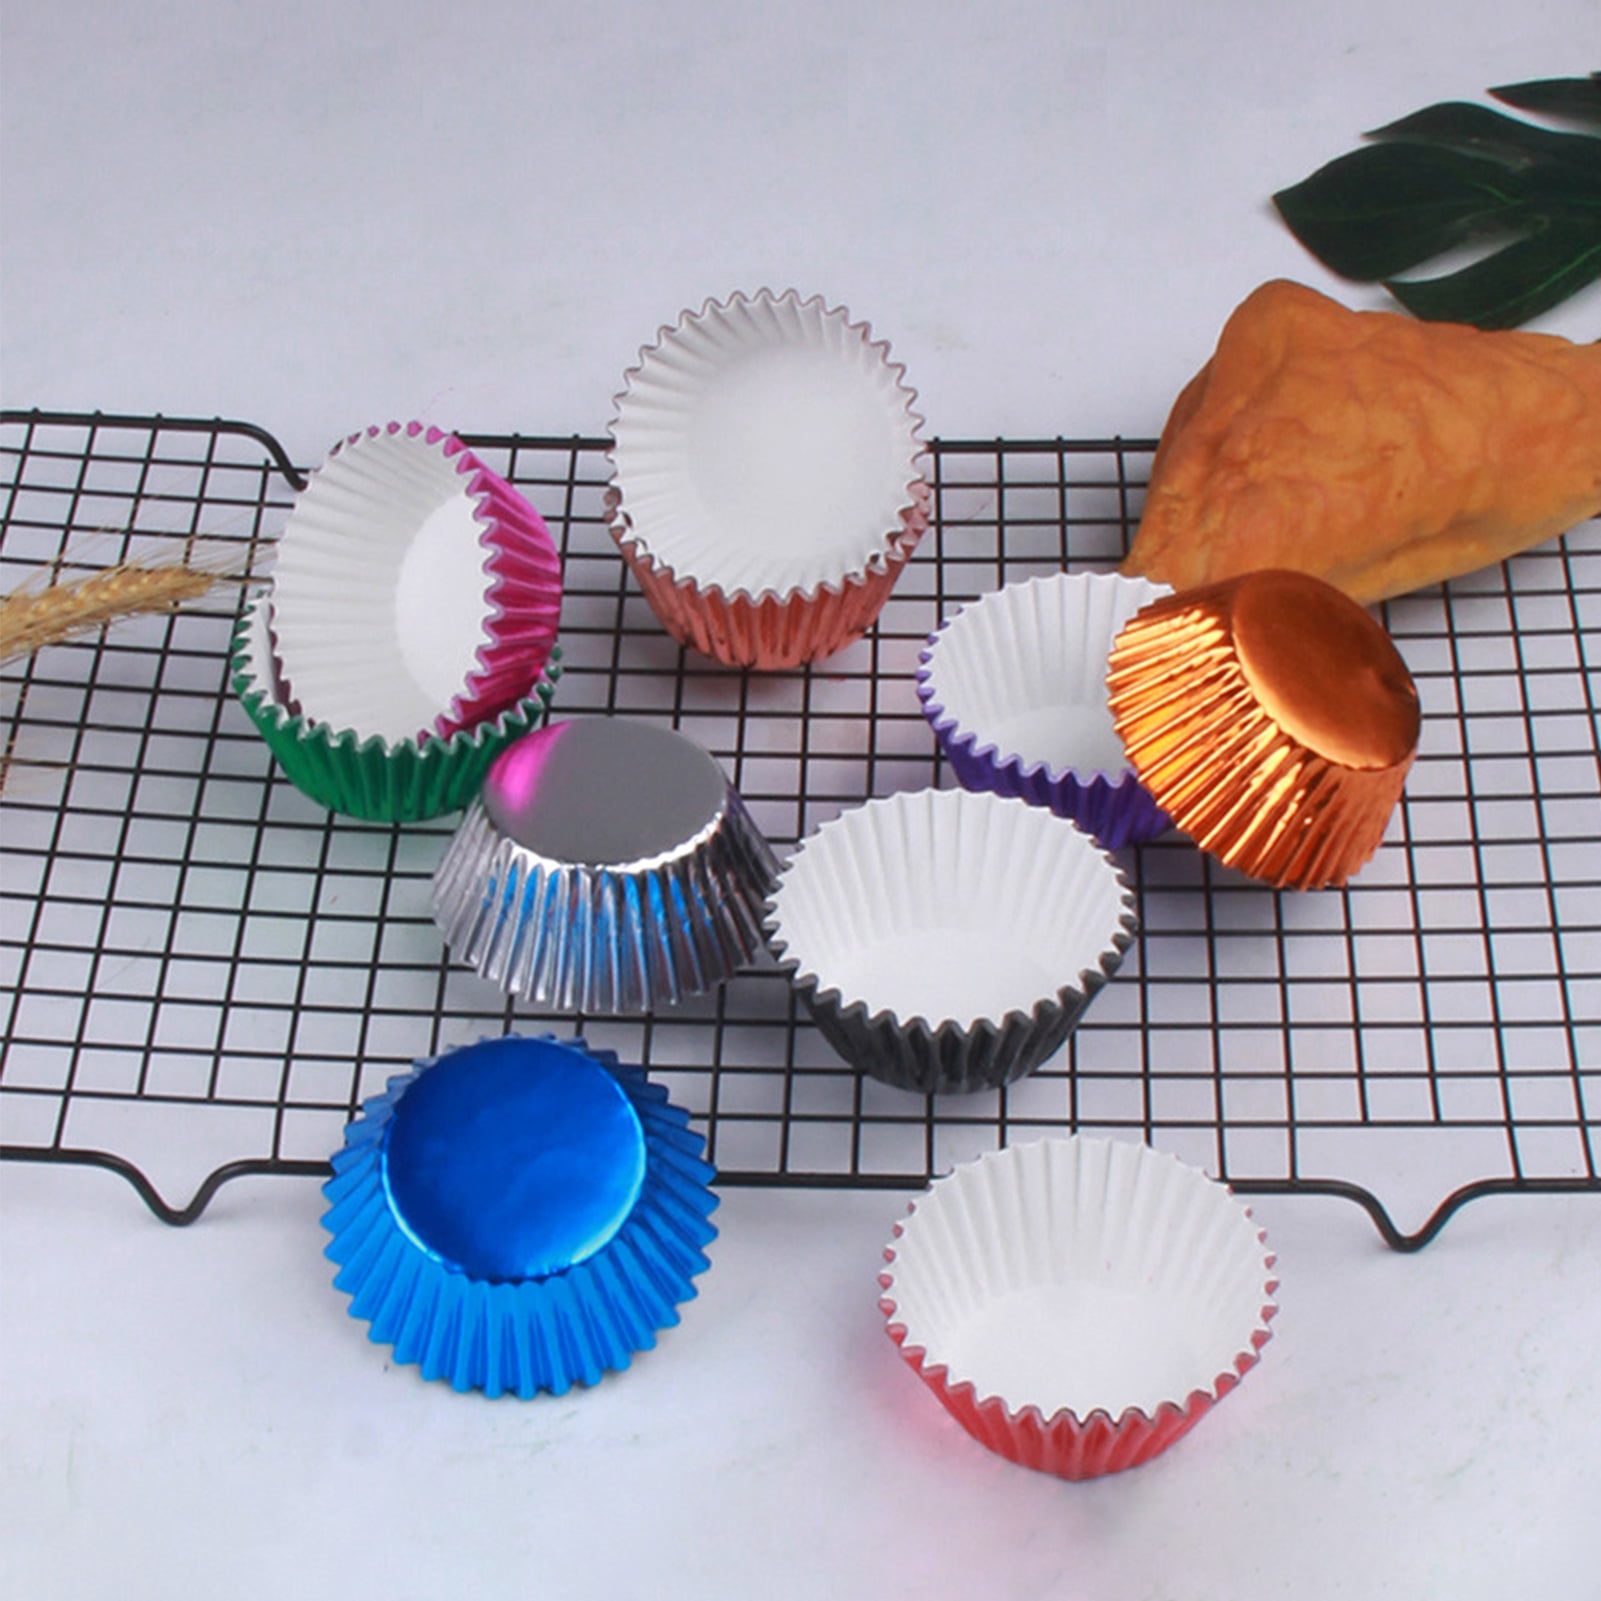 100X Christmas Mini Cupcake Liners Muffin Case Cake Paper Baking Cups Colorful